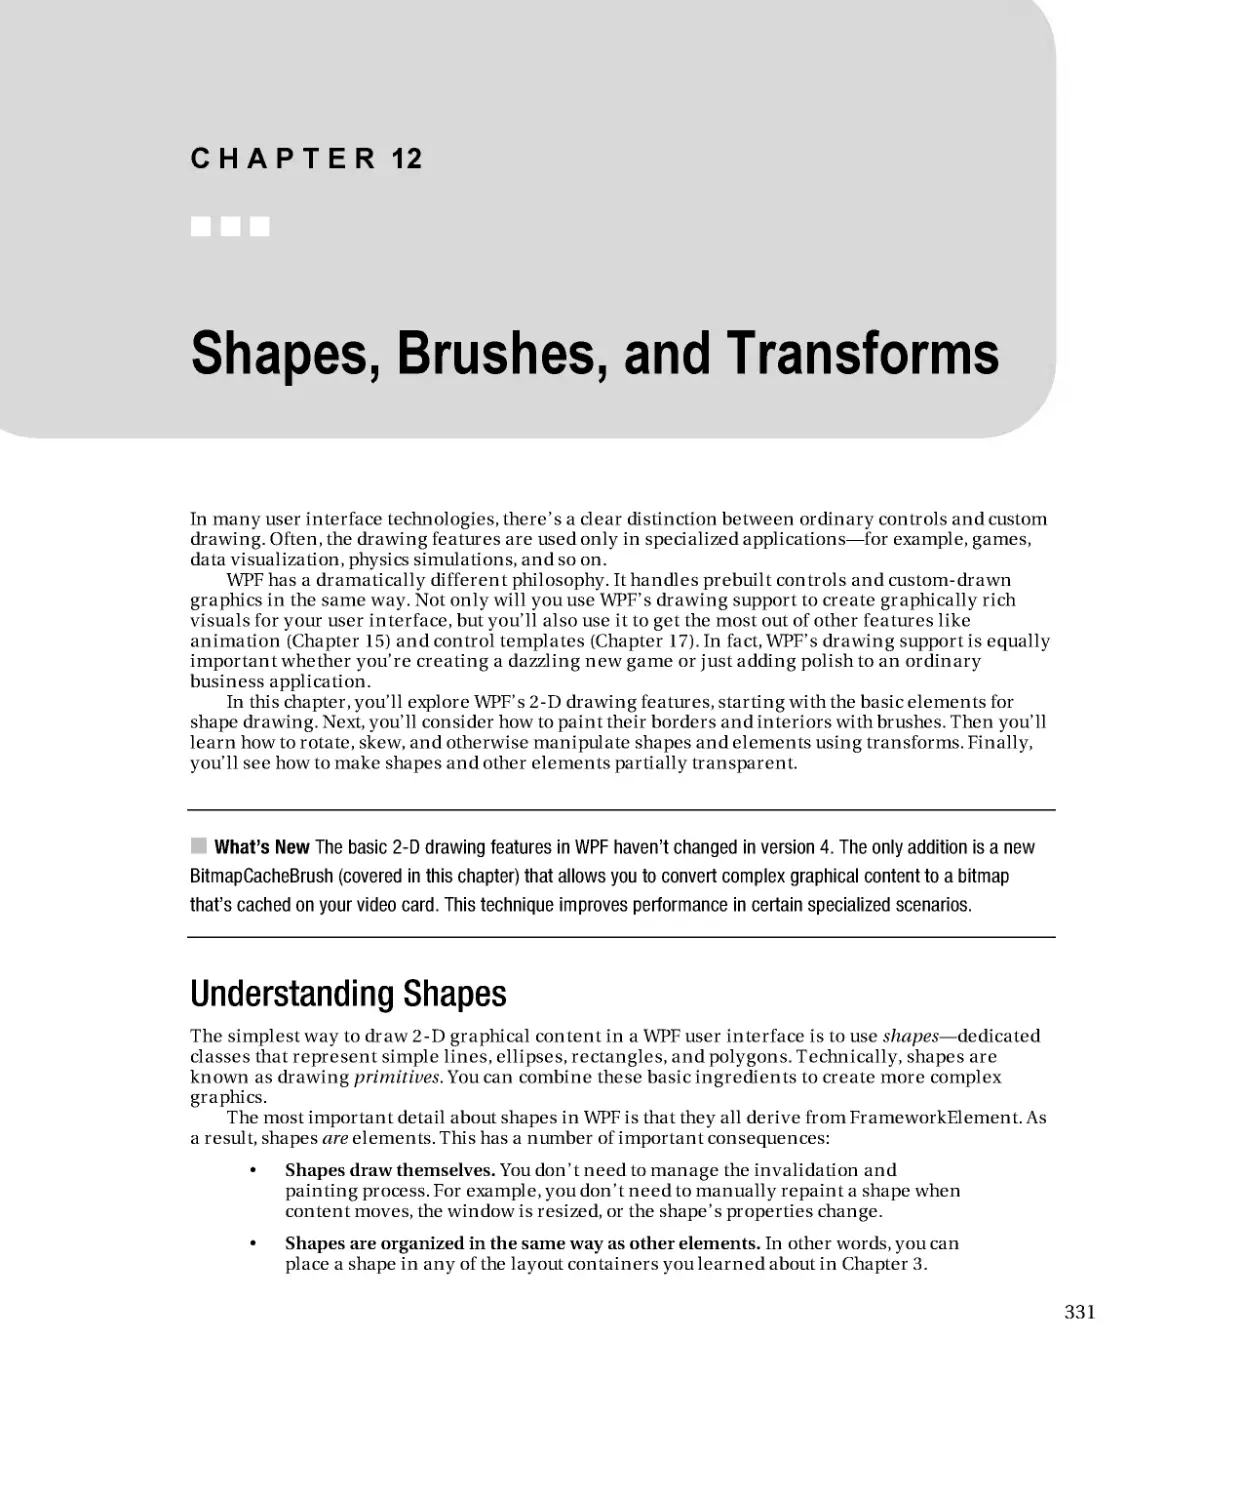 Shapes, Brushes, and Transforms